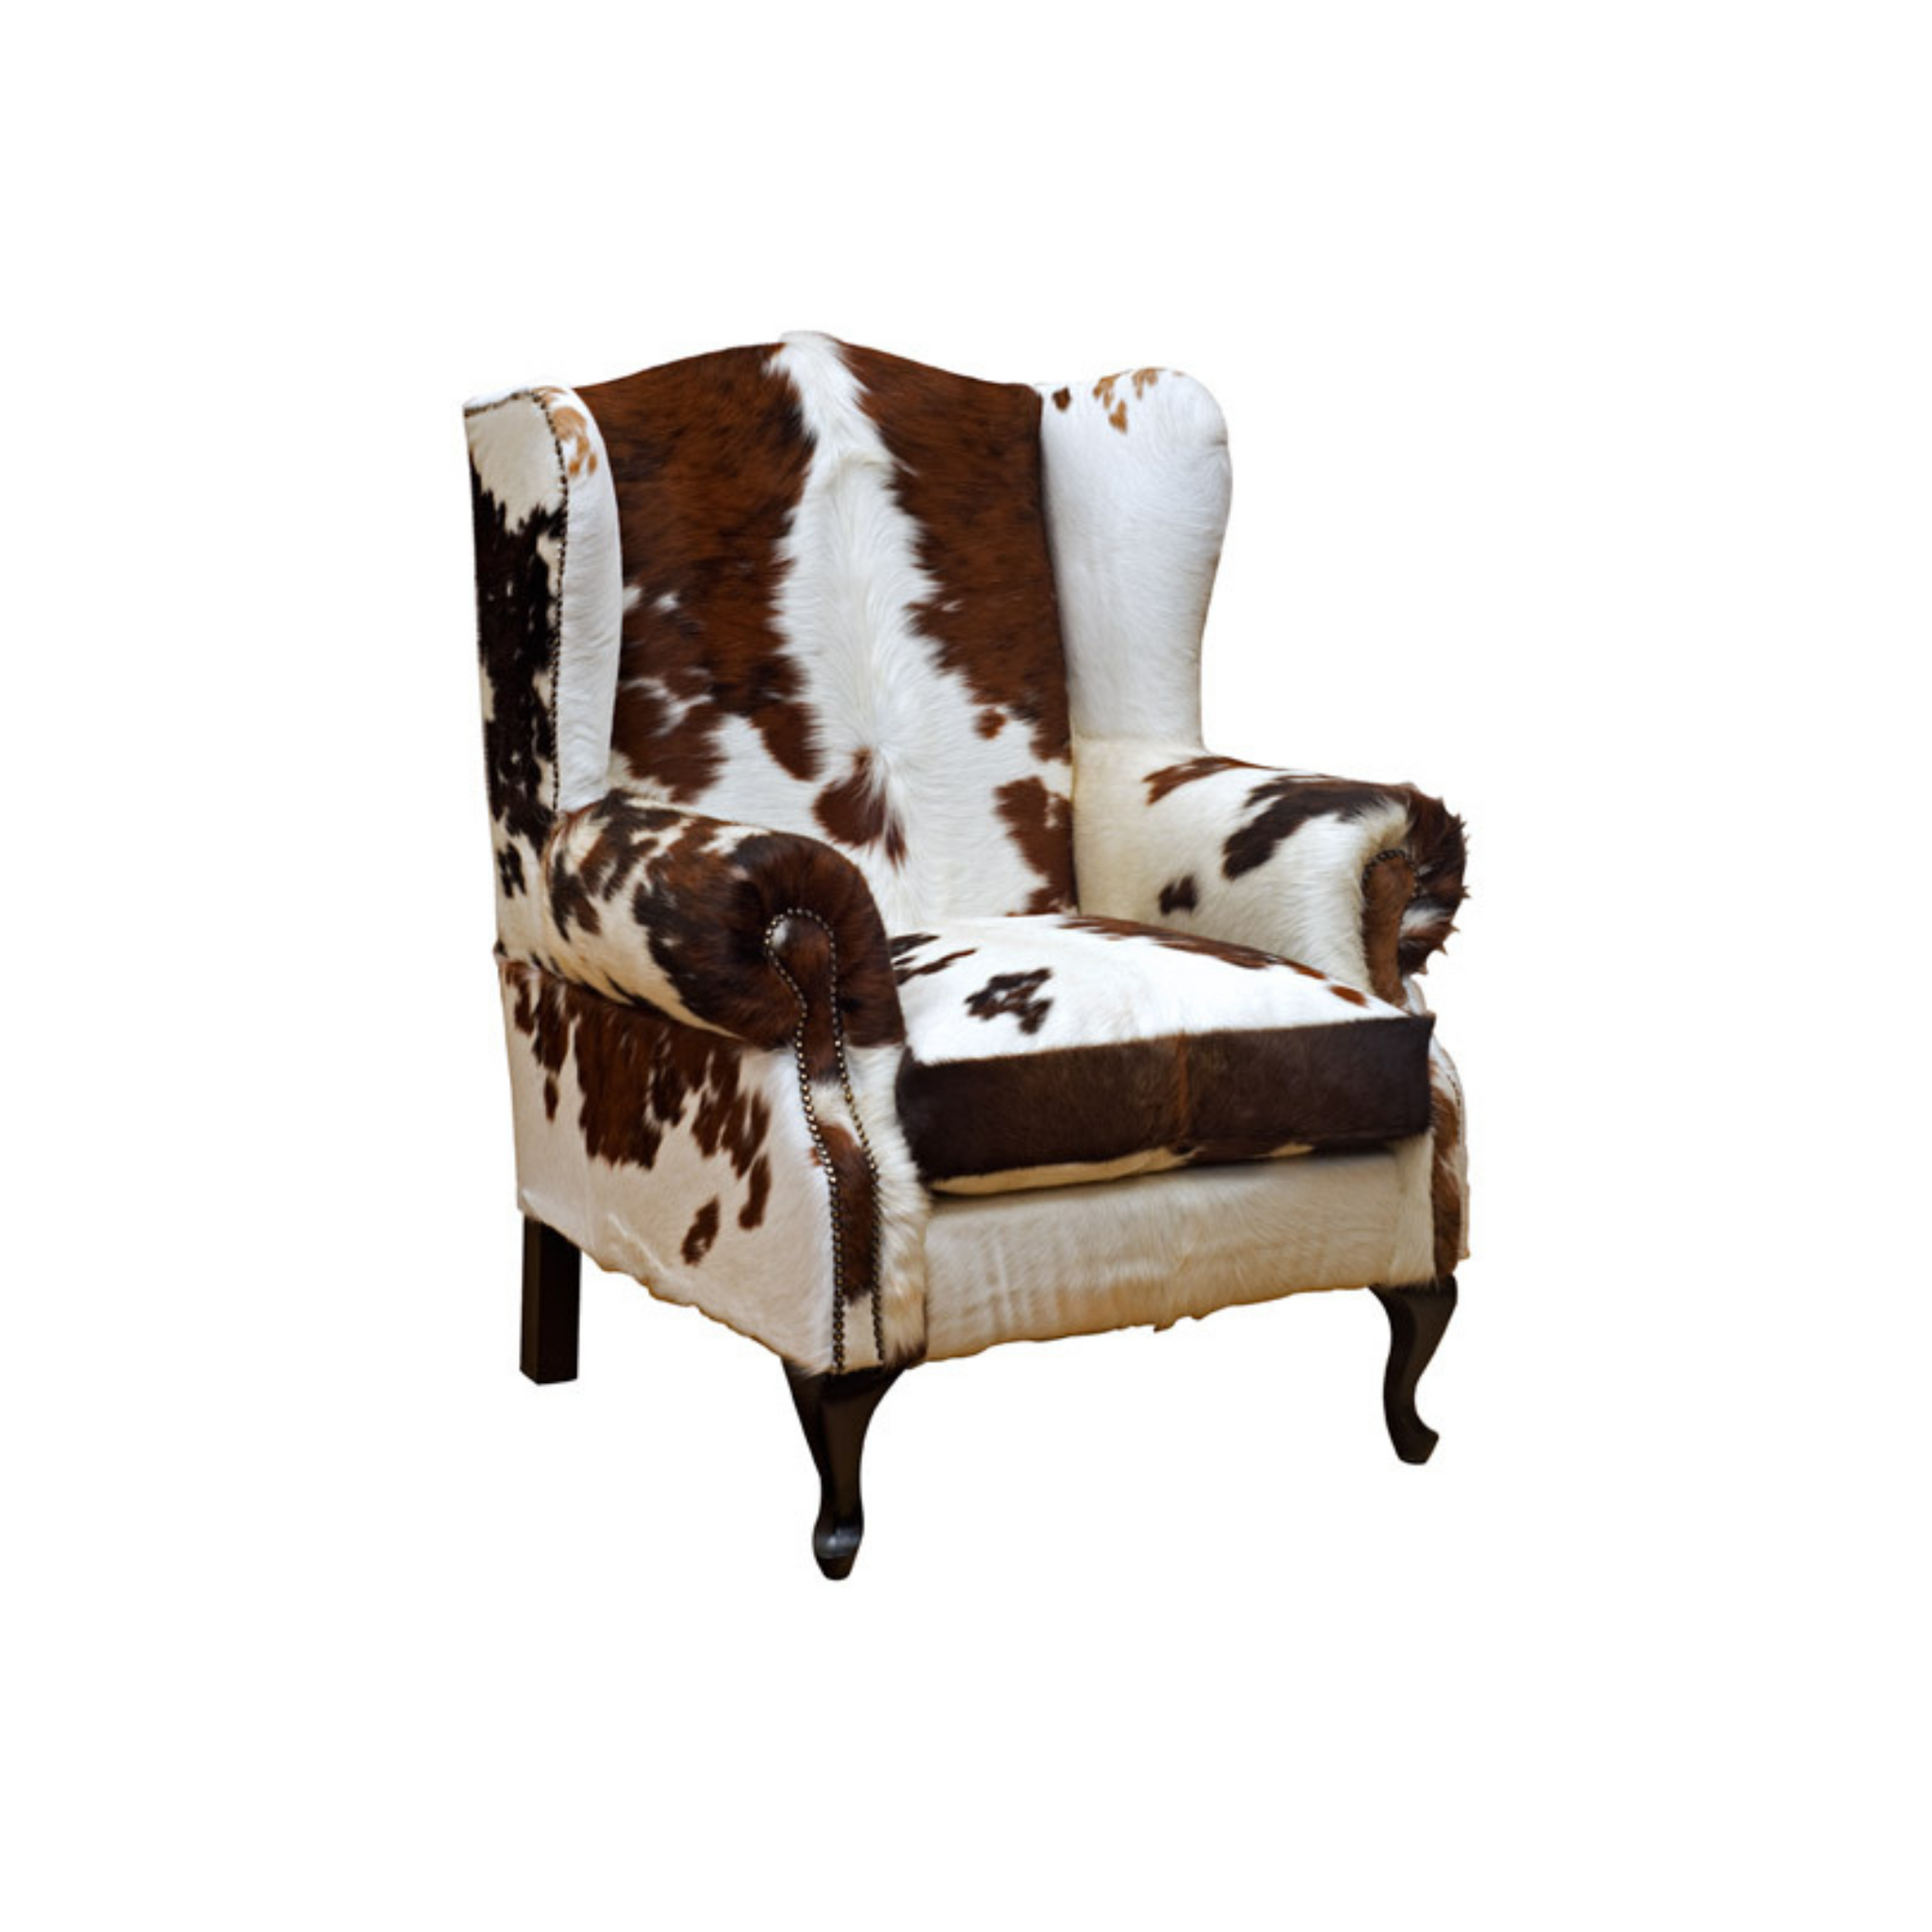 Nguni Wingback Cow Hide – Immerse yourself in the luxury of the Nguni Wingback chair crafted from your chosen cowhide skins. You choose the skins, and we meticulously craft the chair for you, ensuring a unique and personalized addition to your living space